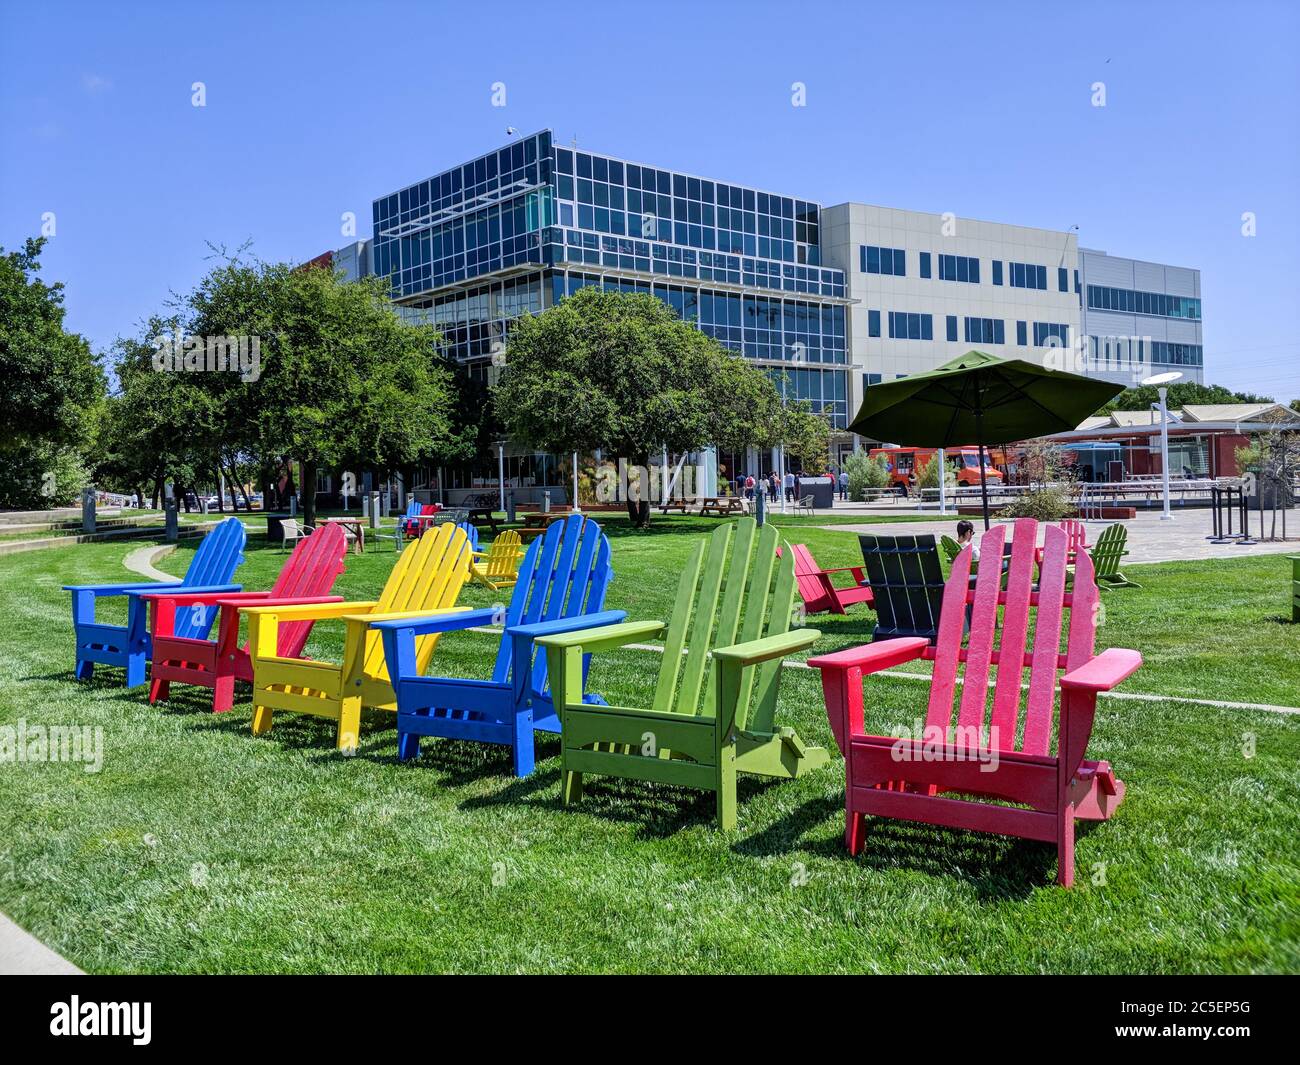 Mountain view, CA, United States - Jan 15, 2018: Google Crittenden Campus on a beautiful sunny day lawn chairs blue sky Stock Photo